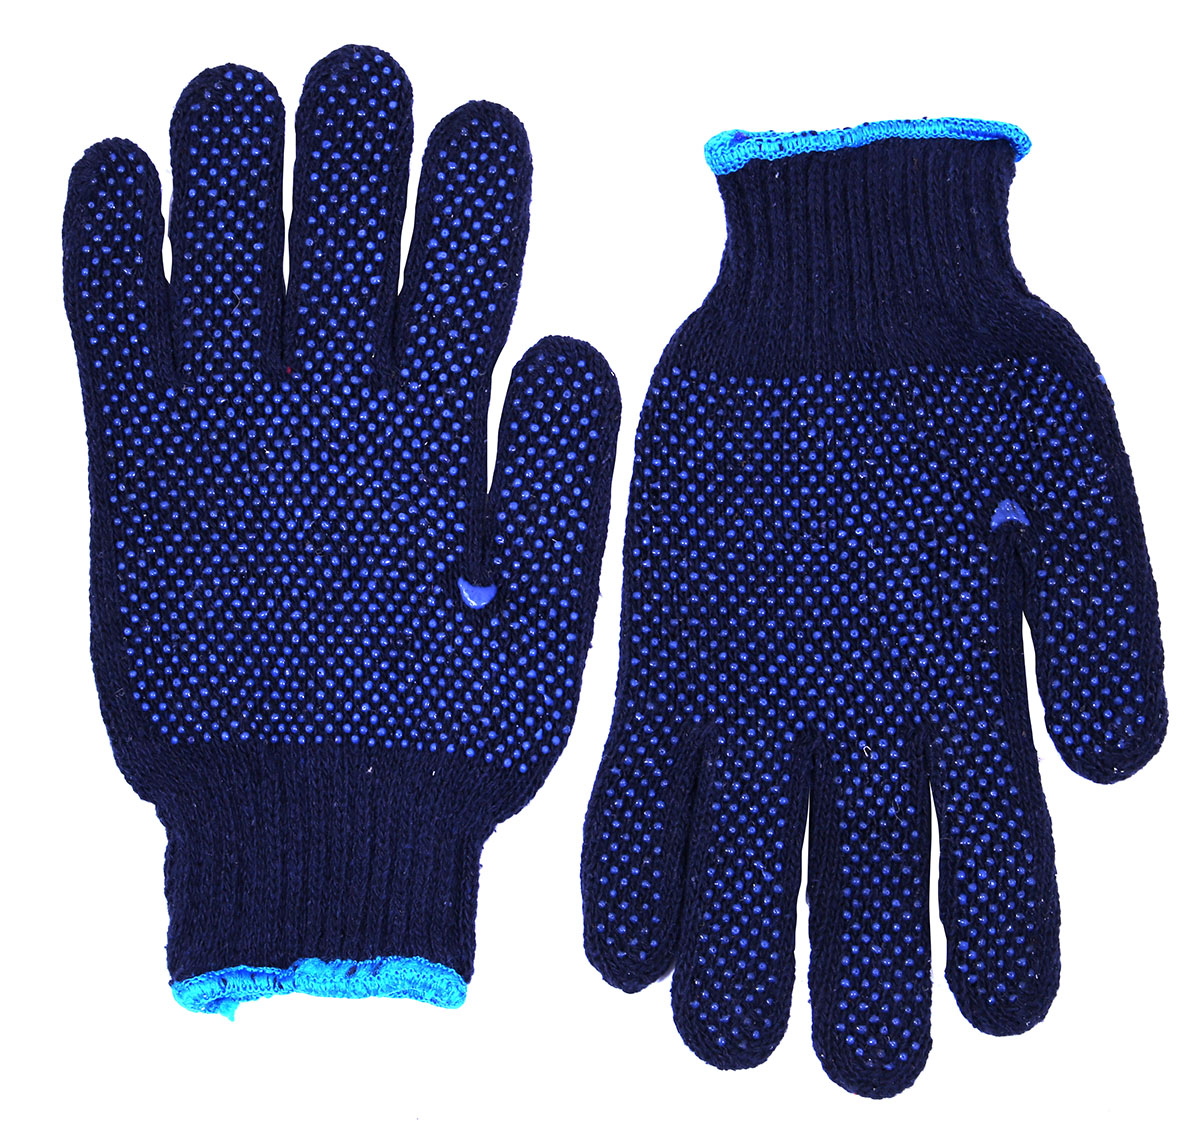 800Benaa :: Hand Gloves - Dotted Blue